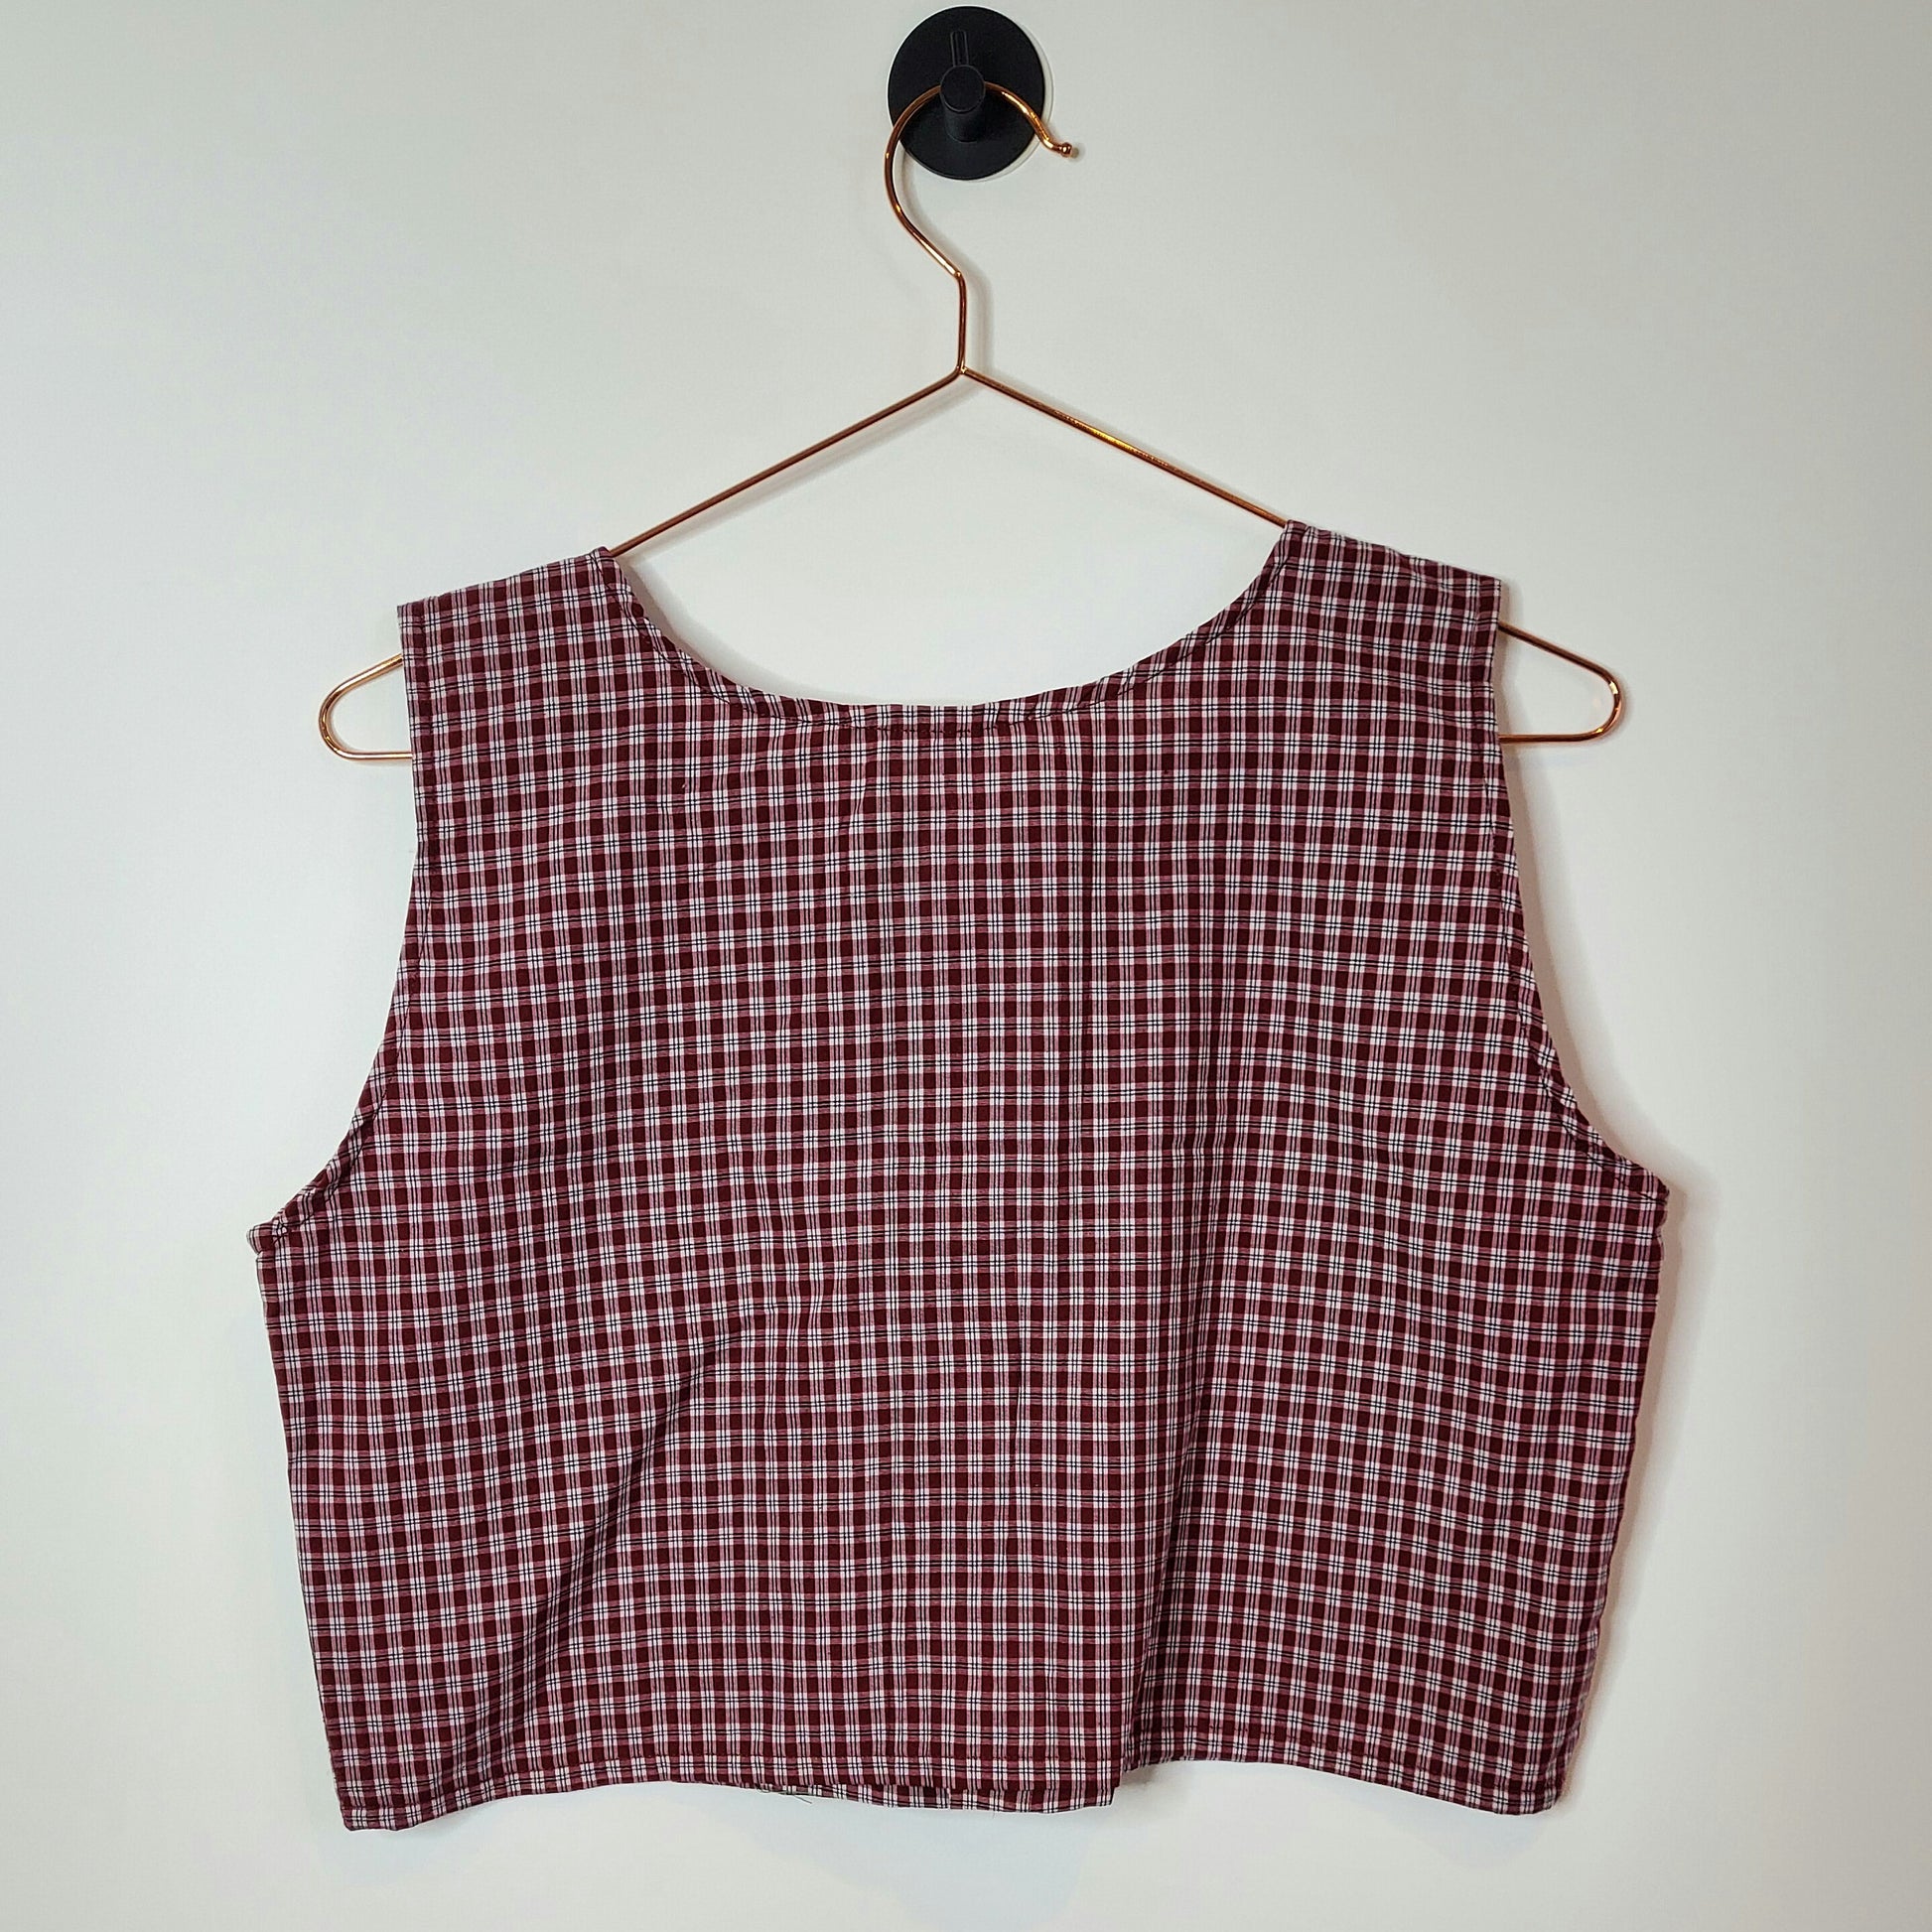 Upcycled Checked Crop Blouse Red and White Gingham Blouse size 12-14